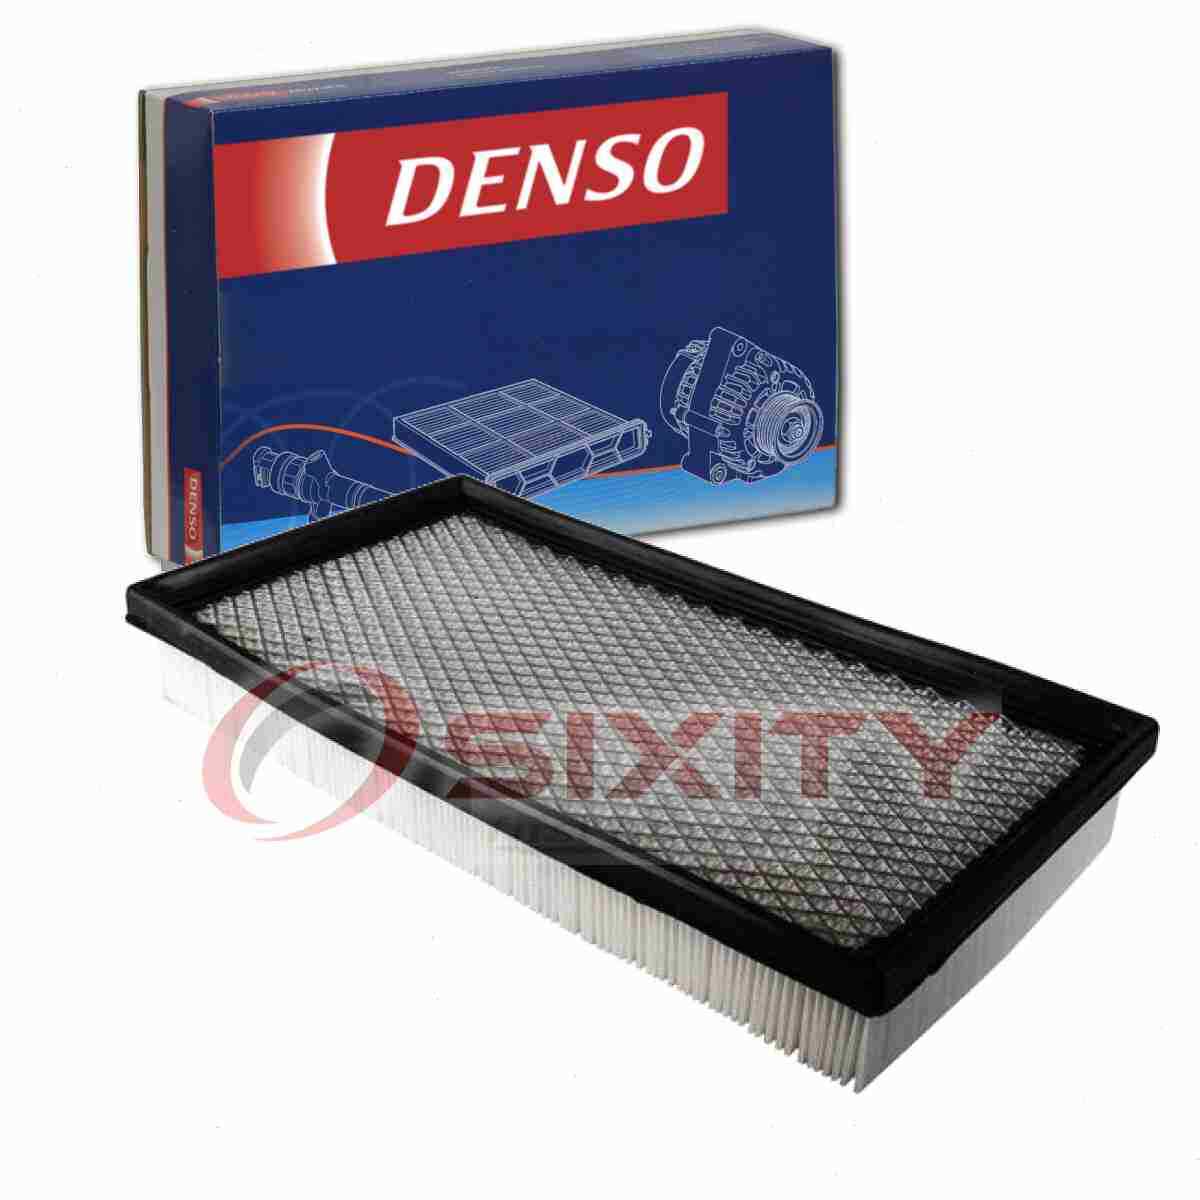 Denso Air Filter for 1991 GMC Syclone 4.3L V6 Intake Inlet Manifold Fuel my